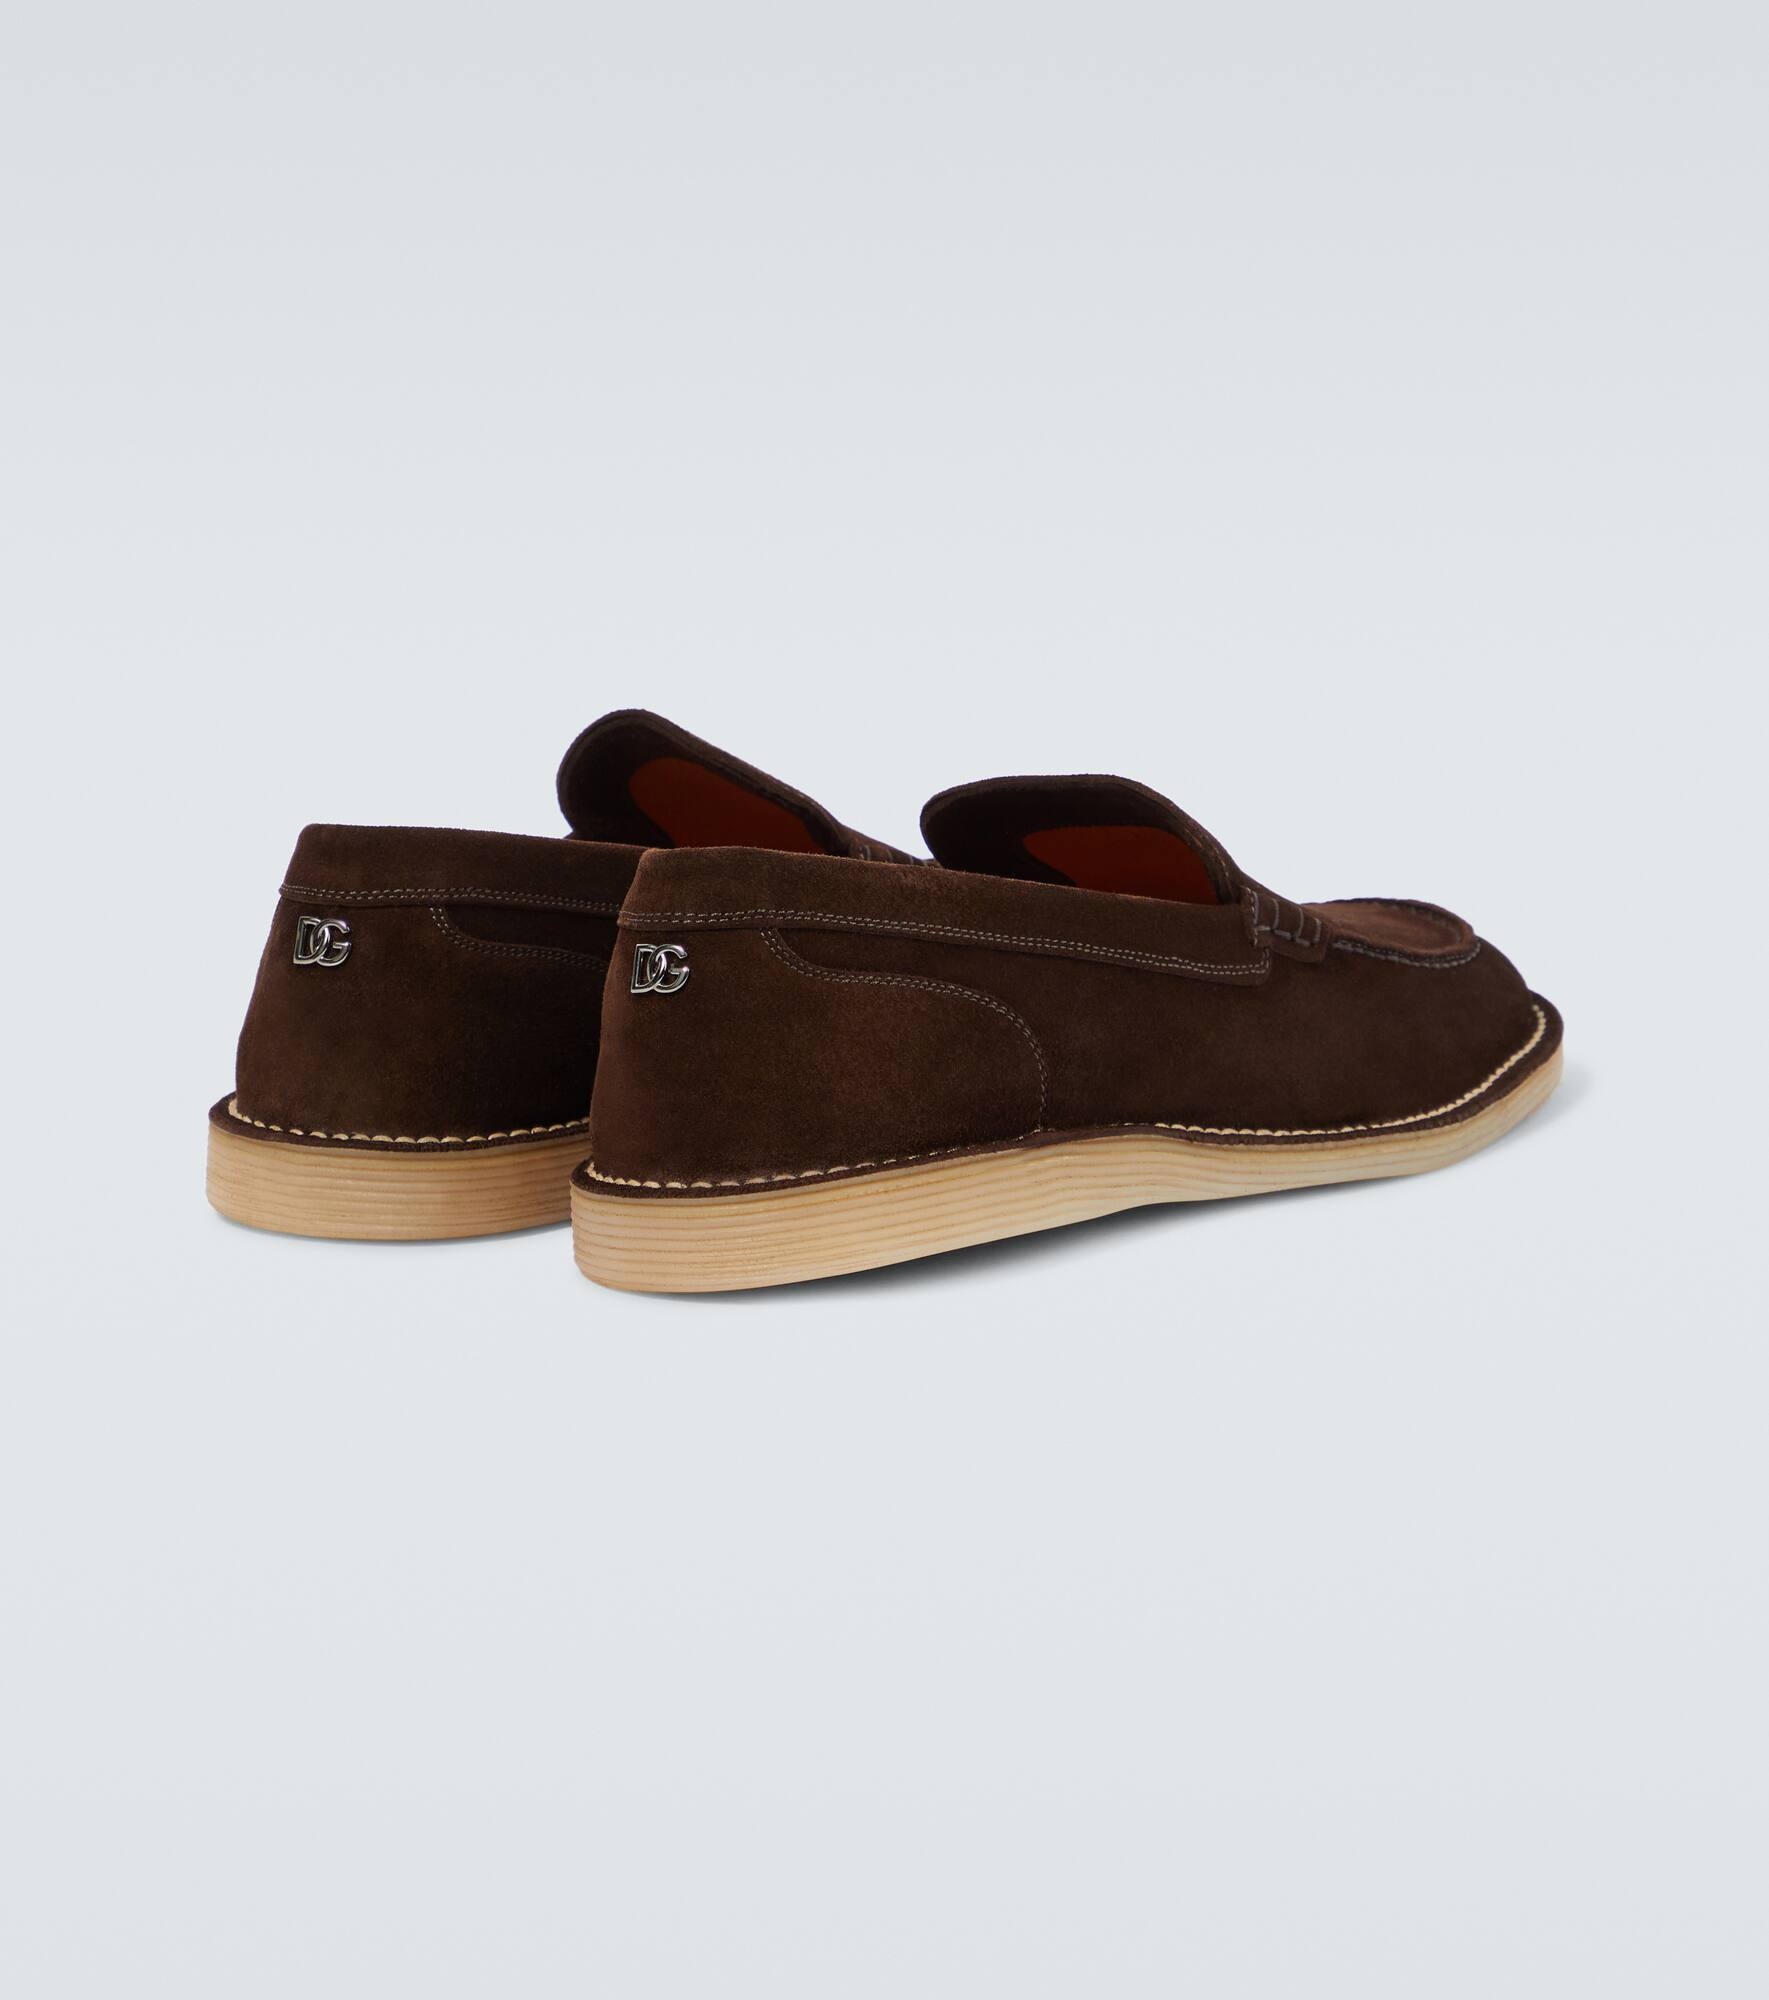 New Florio Ideal suede loafers - 6